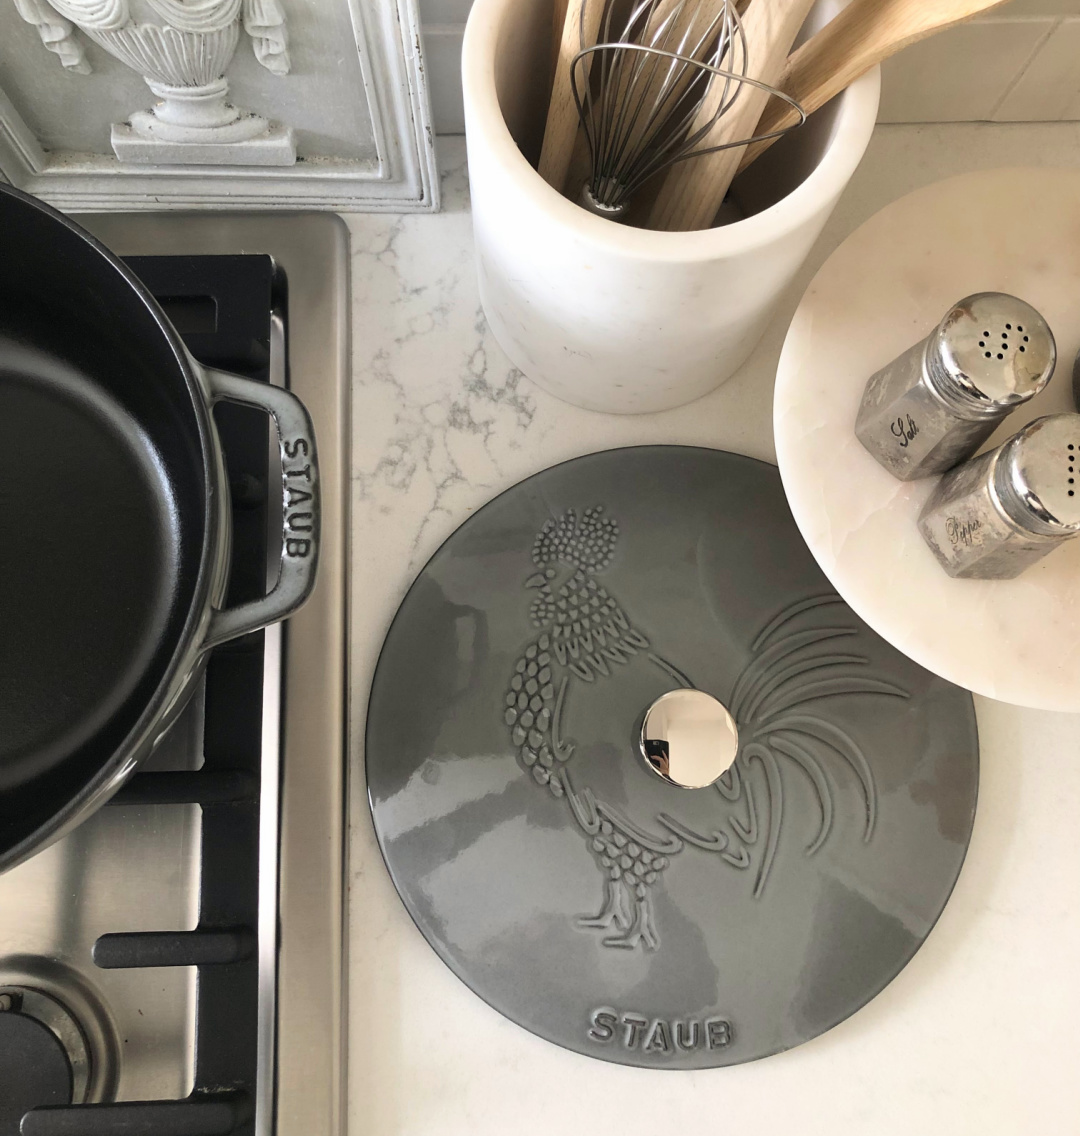 Staub French Oven with Rooster in Graphite Grey on my Muse quartz counter in our Modern French kitchen - Hello Lovely Studio. #staub #frenchkitchens